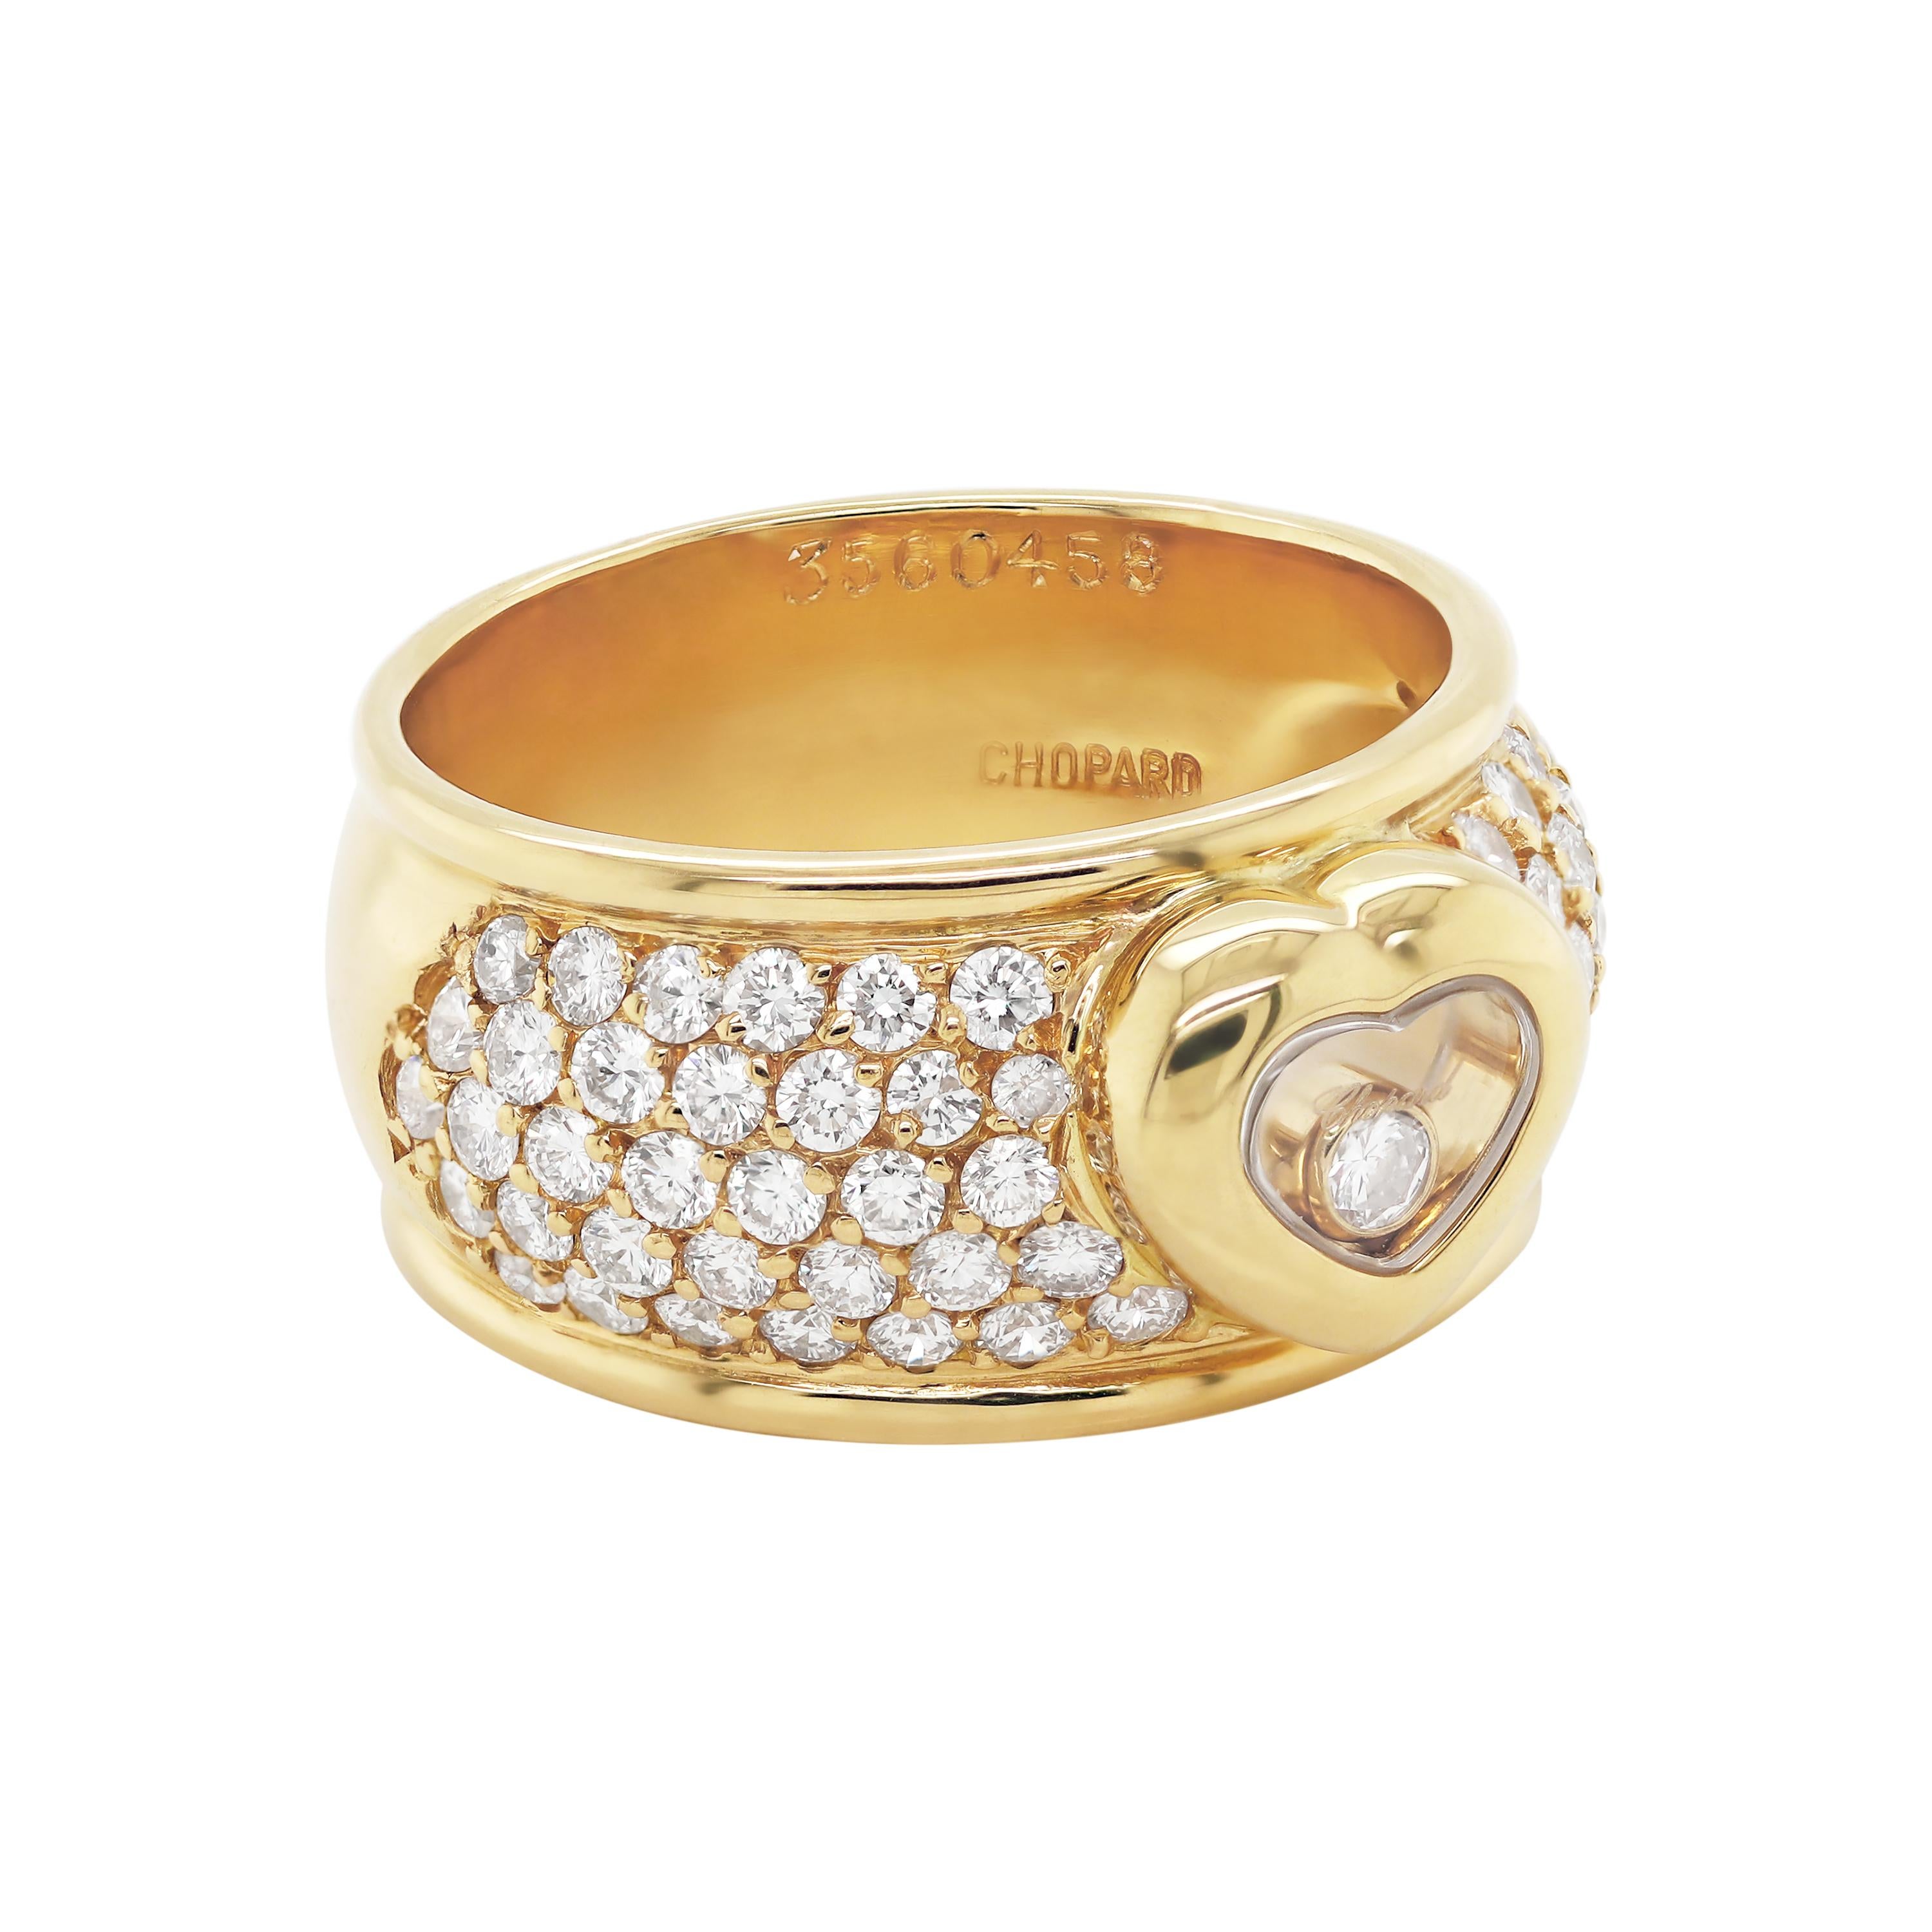 This beautiful ring created by Swedish designer, Chopard is from their signature Happy Diamonds collection. The ring features a freely moving round brilliant cut diamond encased in a yellow gold heart shaped mount. On either side of the heart are 5